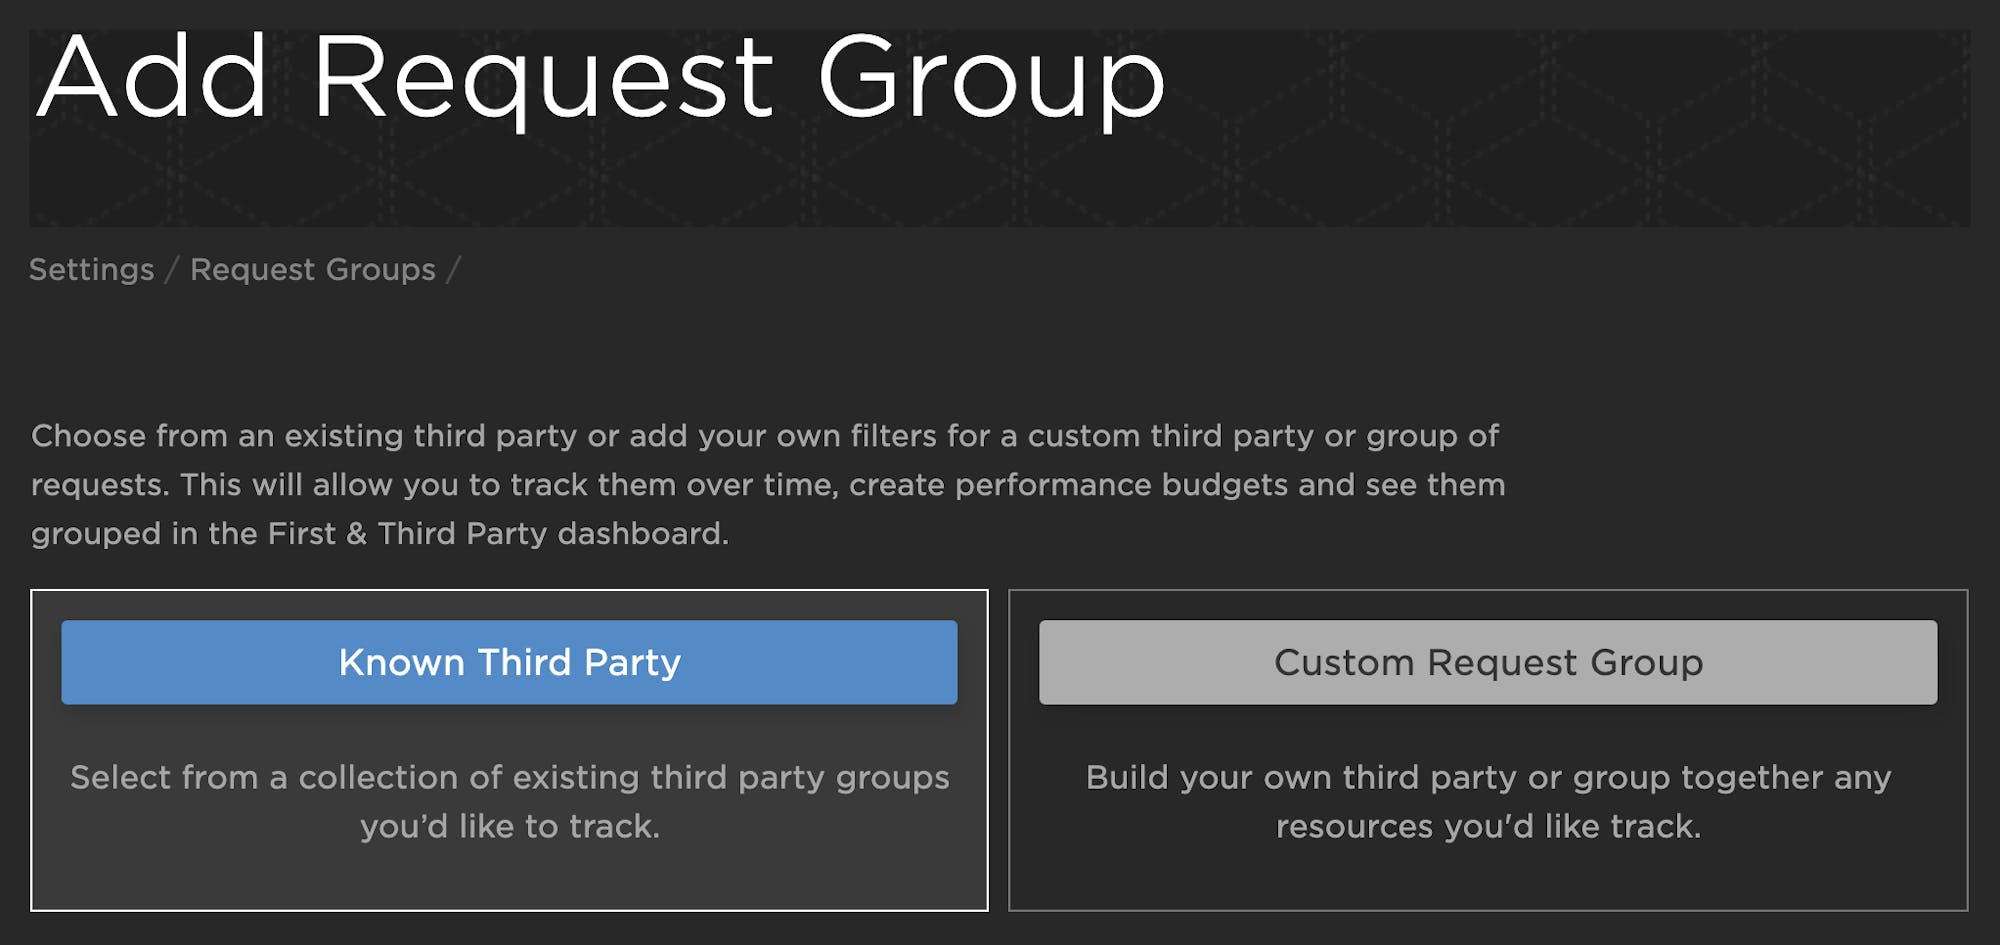 Adding a request group